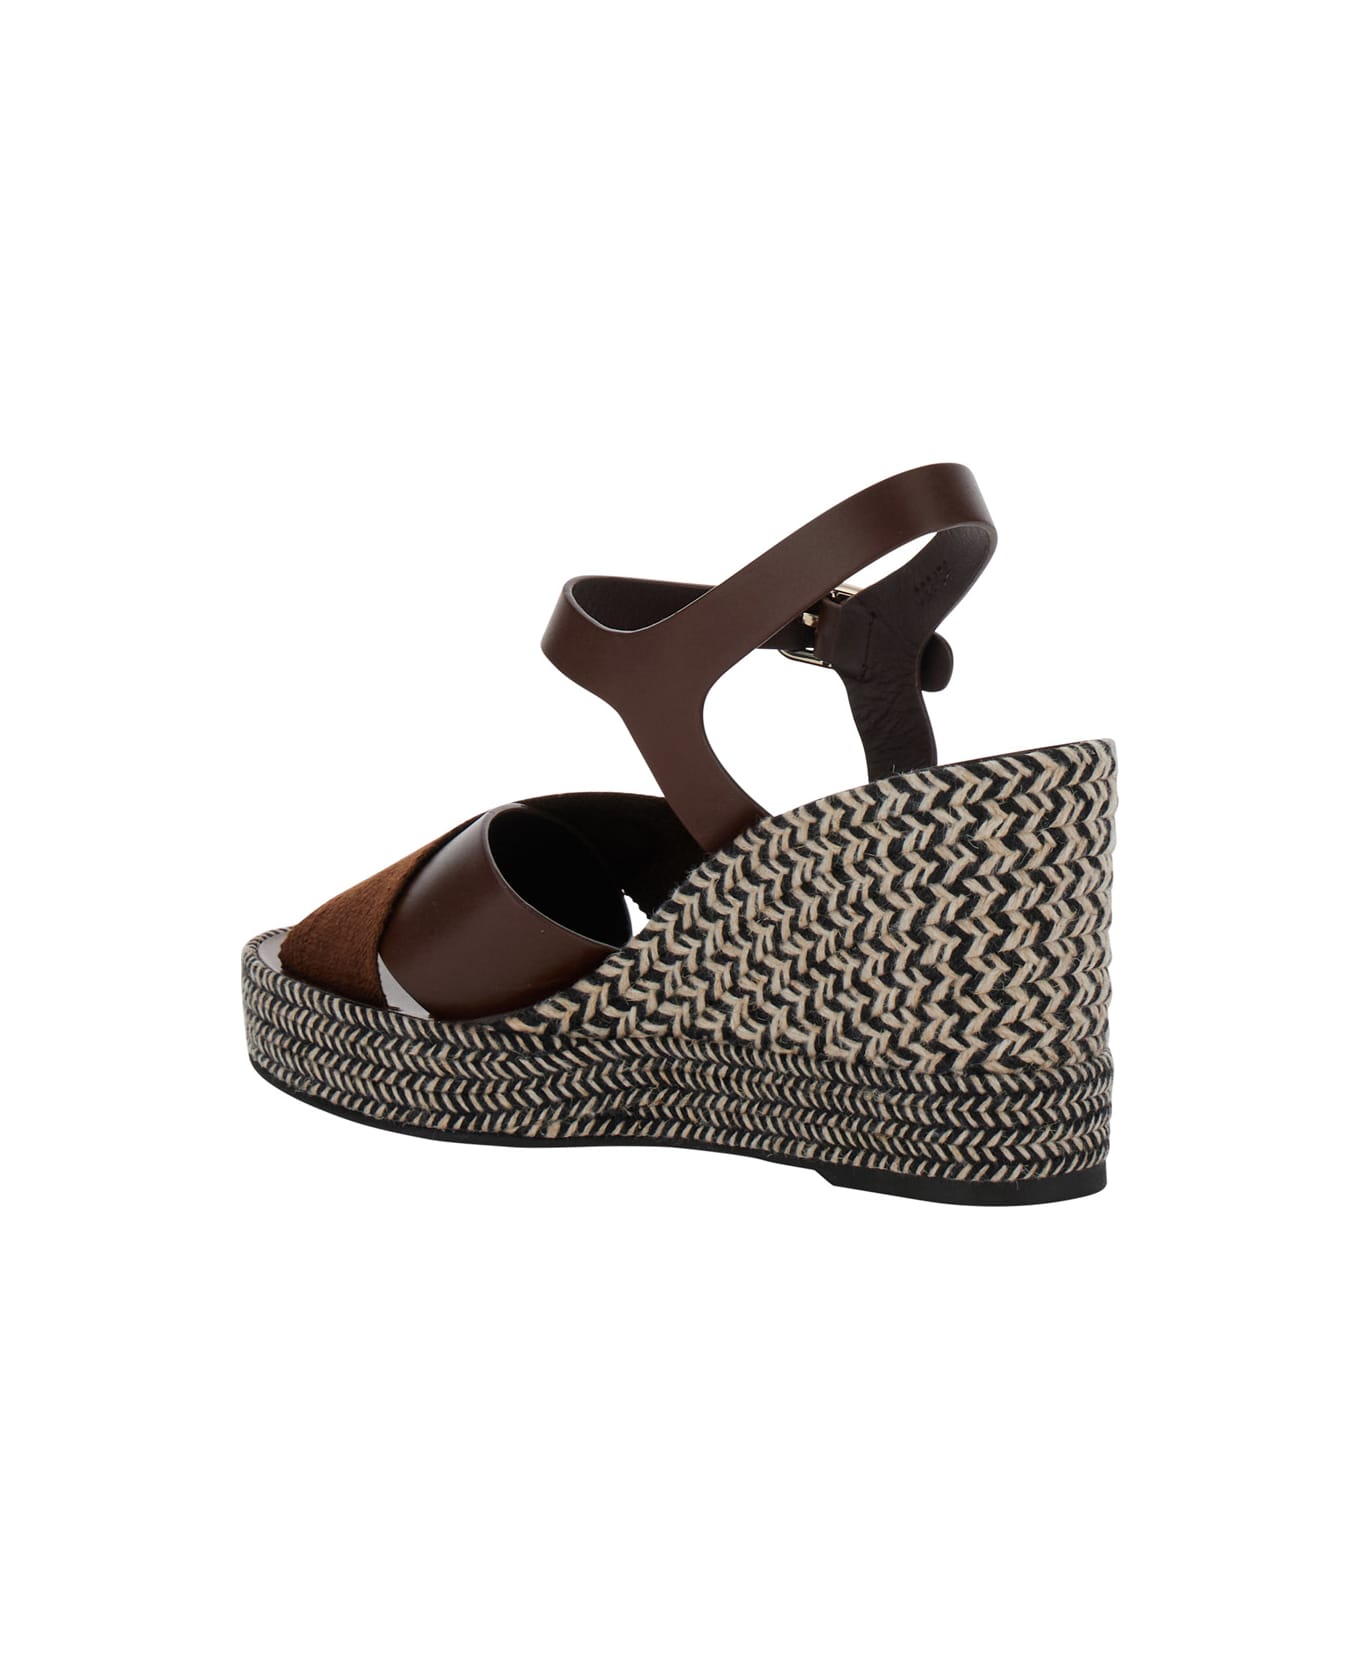 Chloé Espadrillas Sandals With Wedge In Leather And Jute - Brown